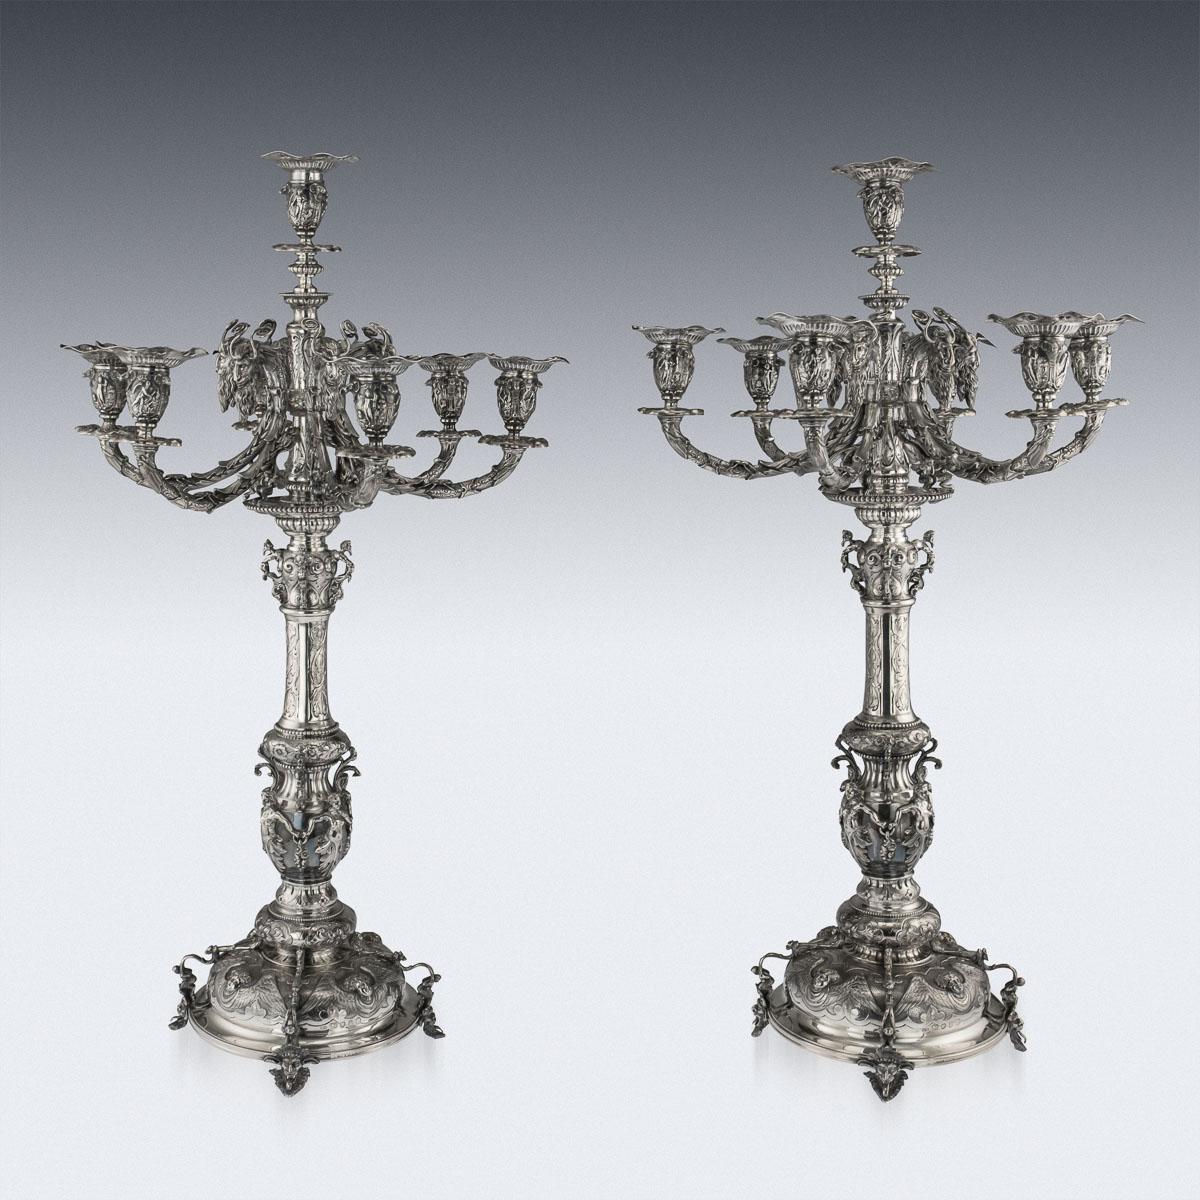 19th Century Victorian Solid Silver Set of Four Candelabras, Macrae, circa 1872-1873 For Sale